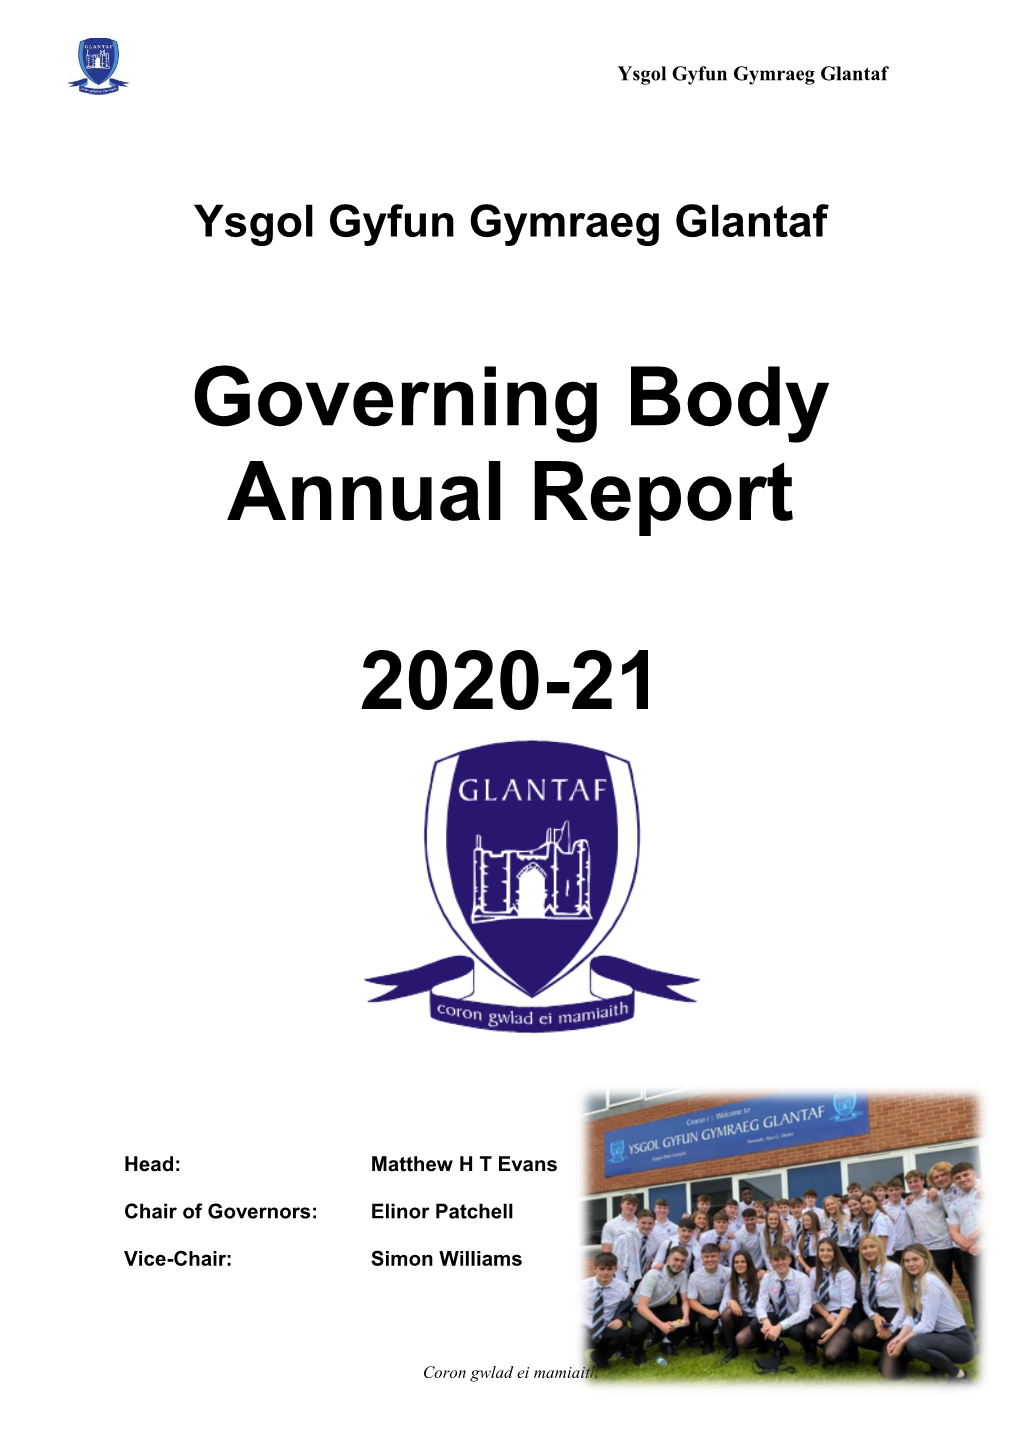 The Latest Annual Report